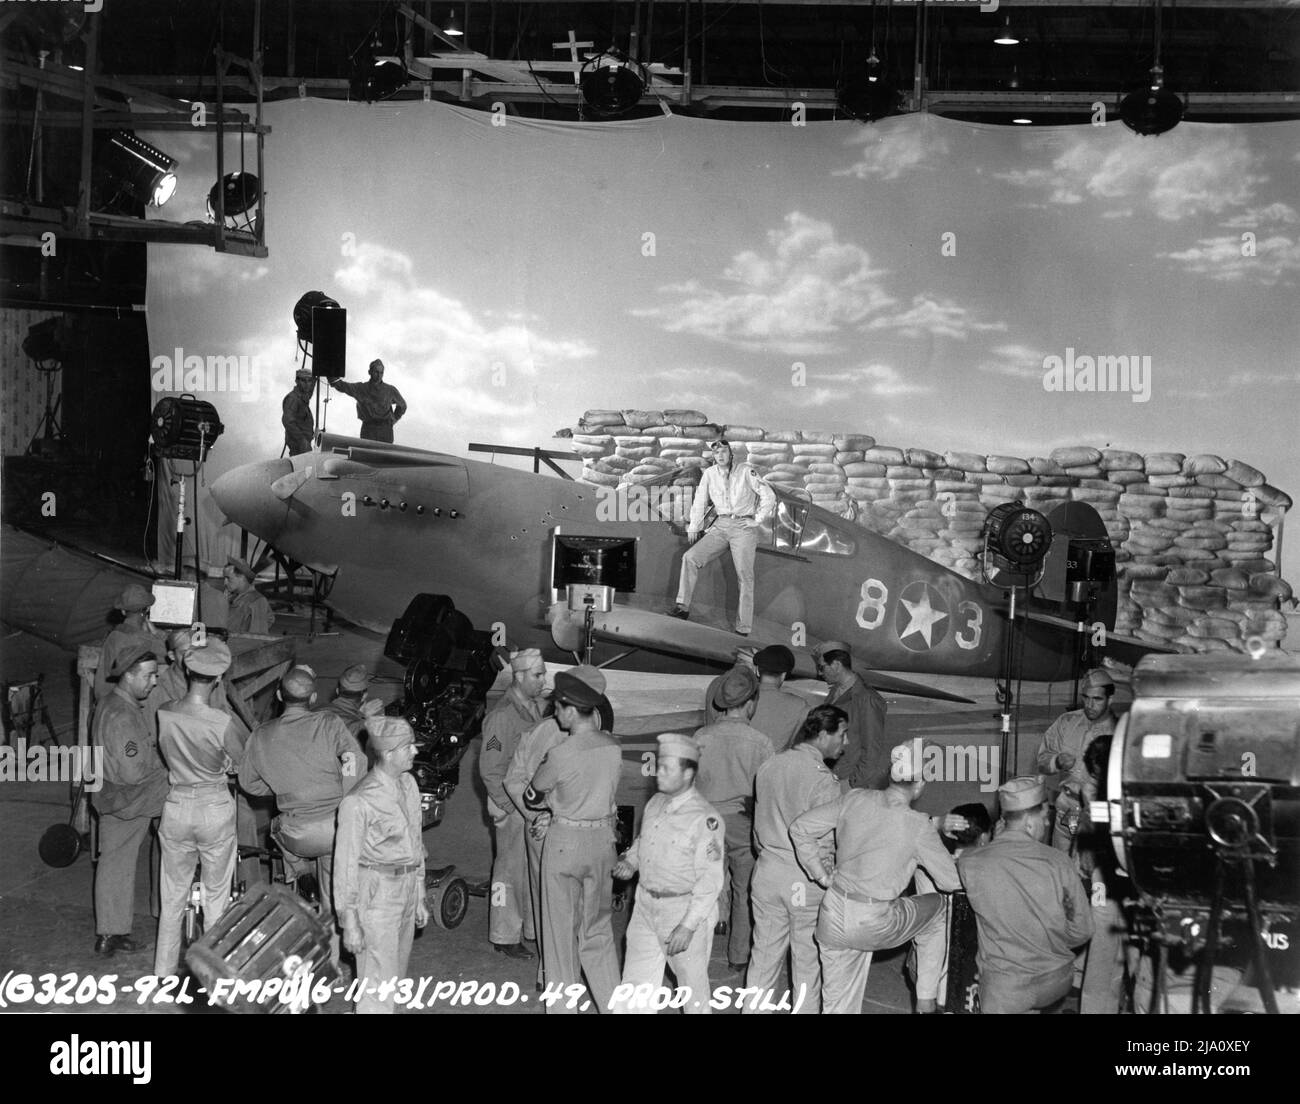 Military Movie Crew on Set Candid Filming a Pilot with His Curtiss P-40 Warhawk Single Engine Fighter Plane on Hollywood Studio Sound Stage il 11th giugno 1943 per un US Army Air Corps / US Army Air Force (USAAF) Propaganda Film Foto Stock